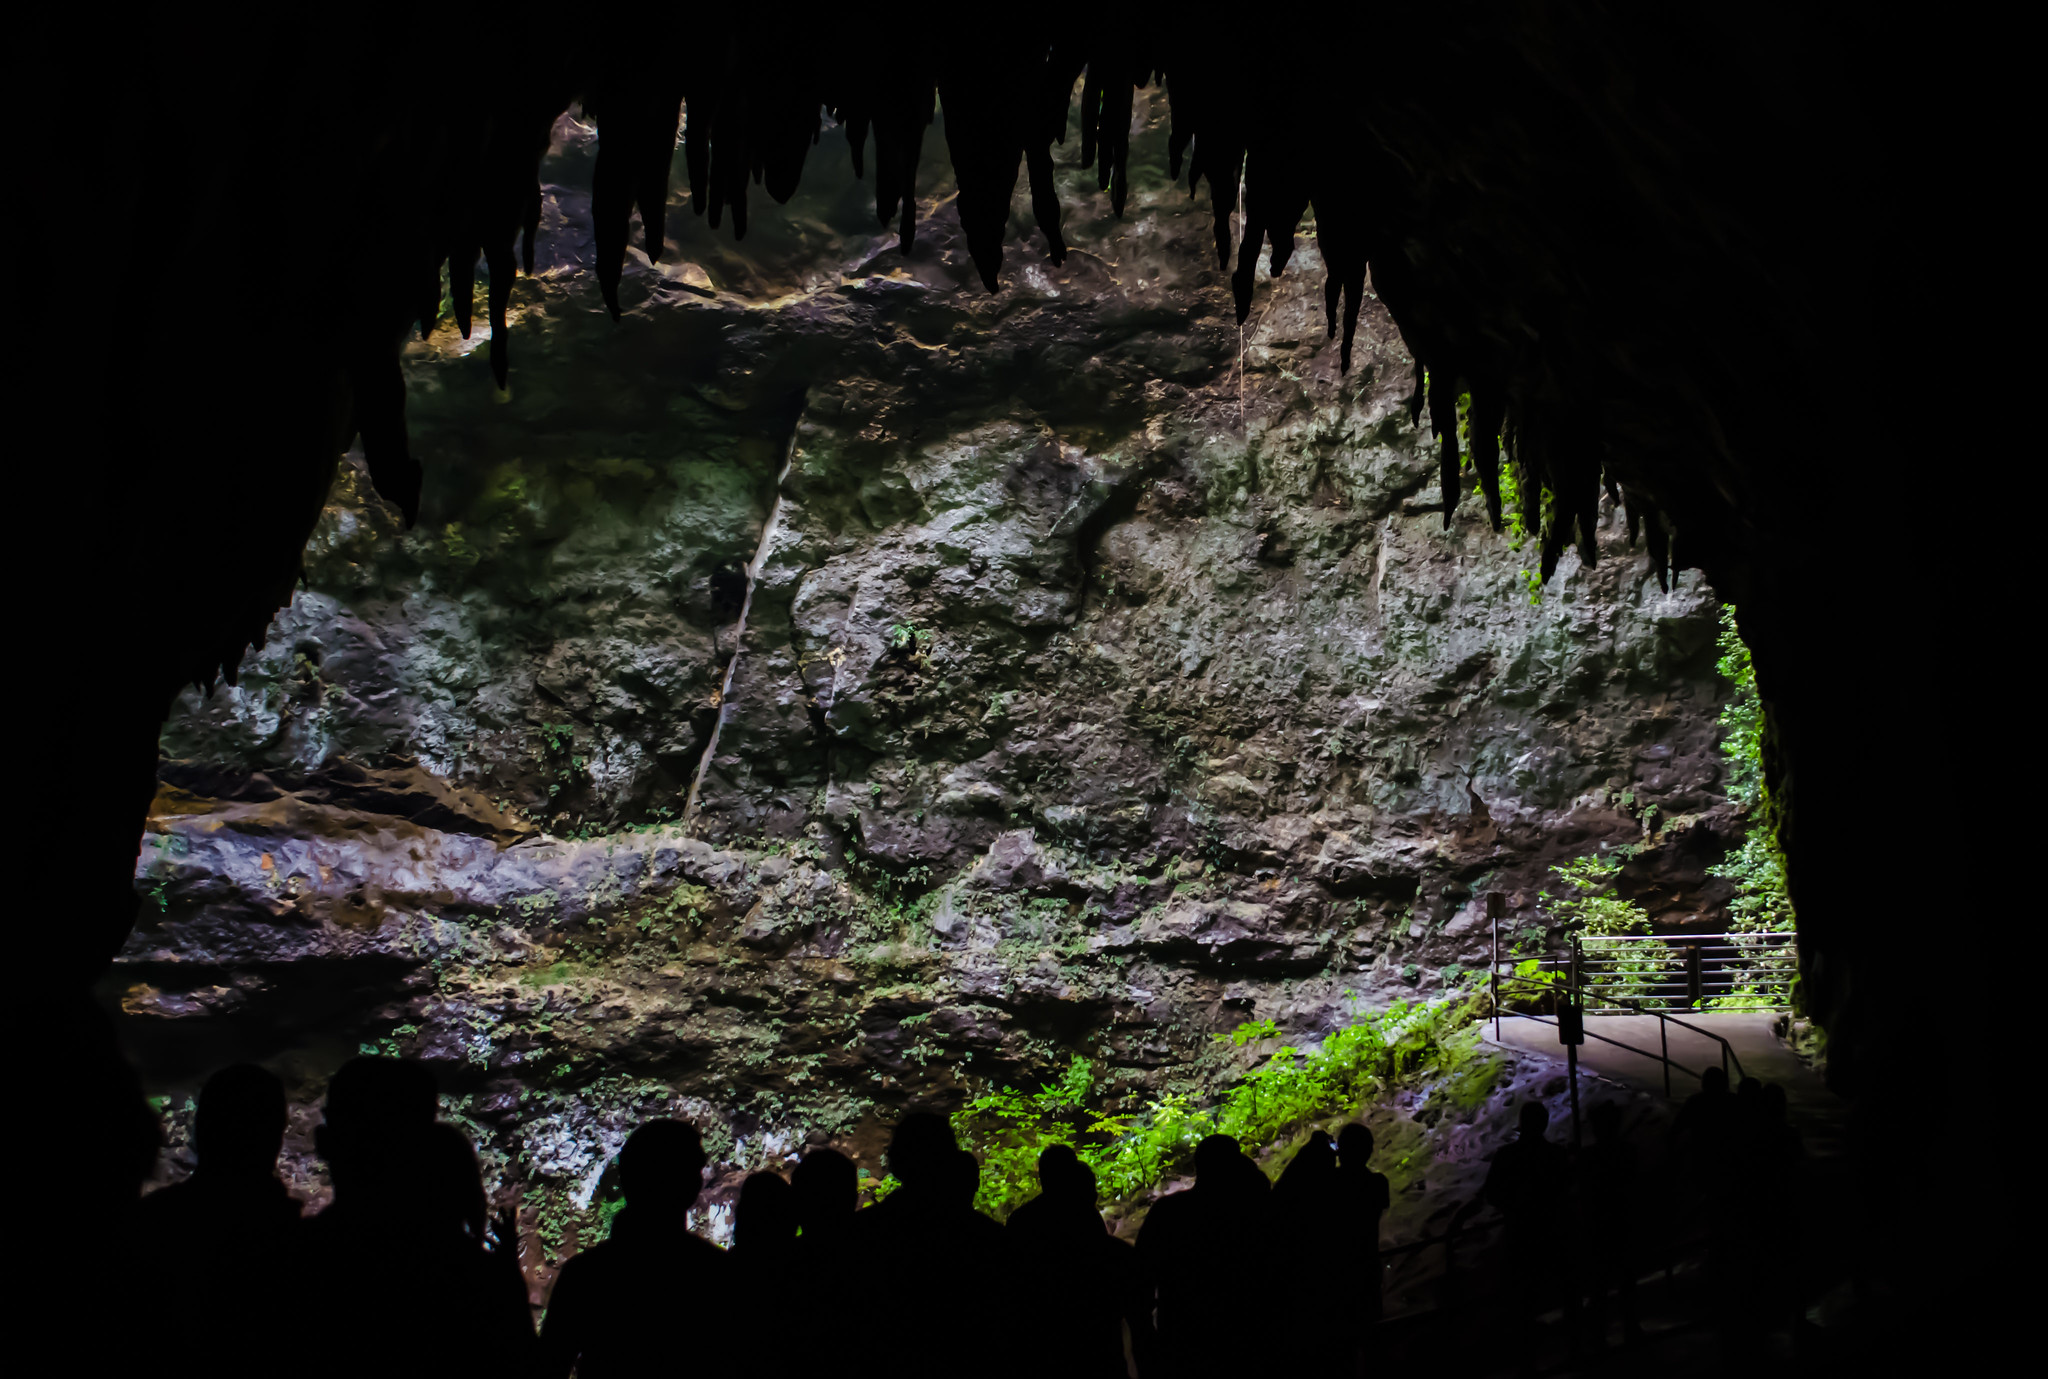 Silhouette of people visiting the majestic Rio Camuy River Cave Park, one of the top things to do in Puerto Rico